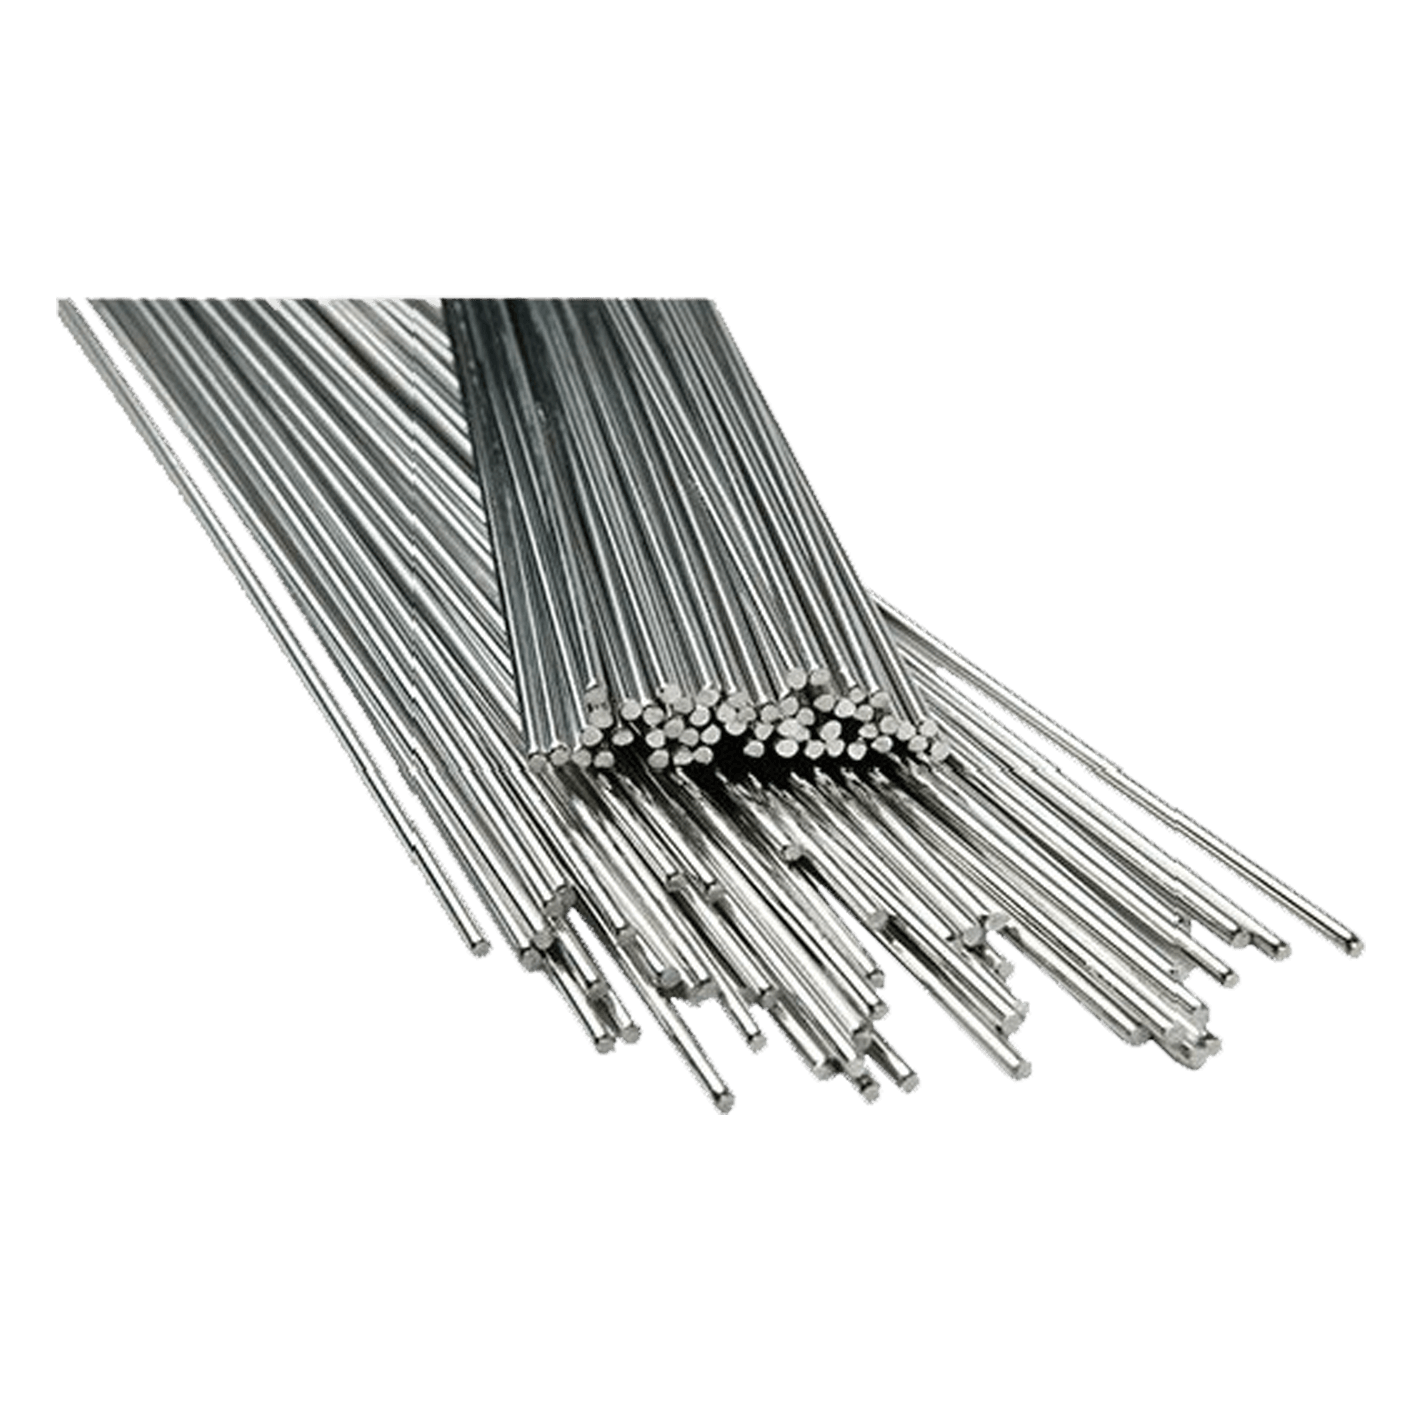 ESAB STAINLESS STEEL RODS (GTAW)